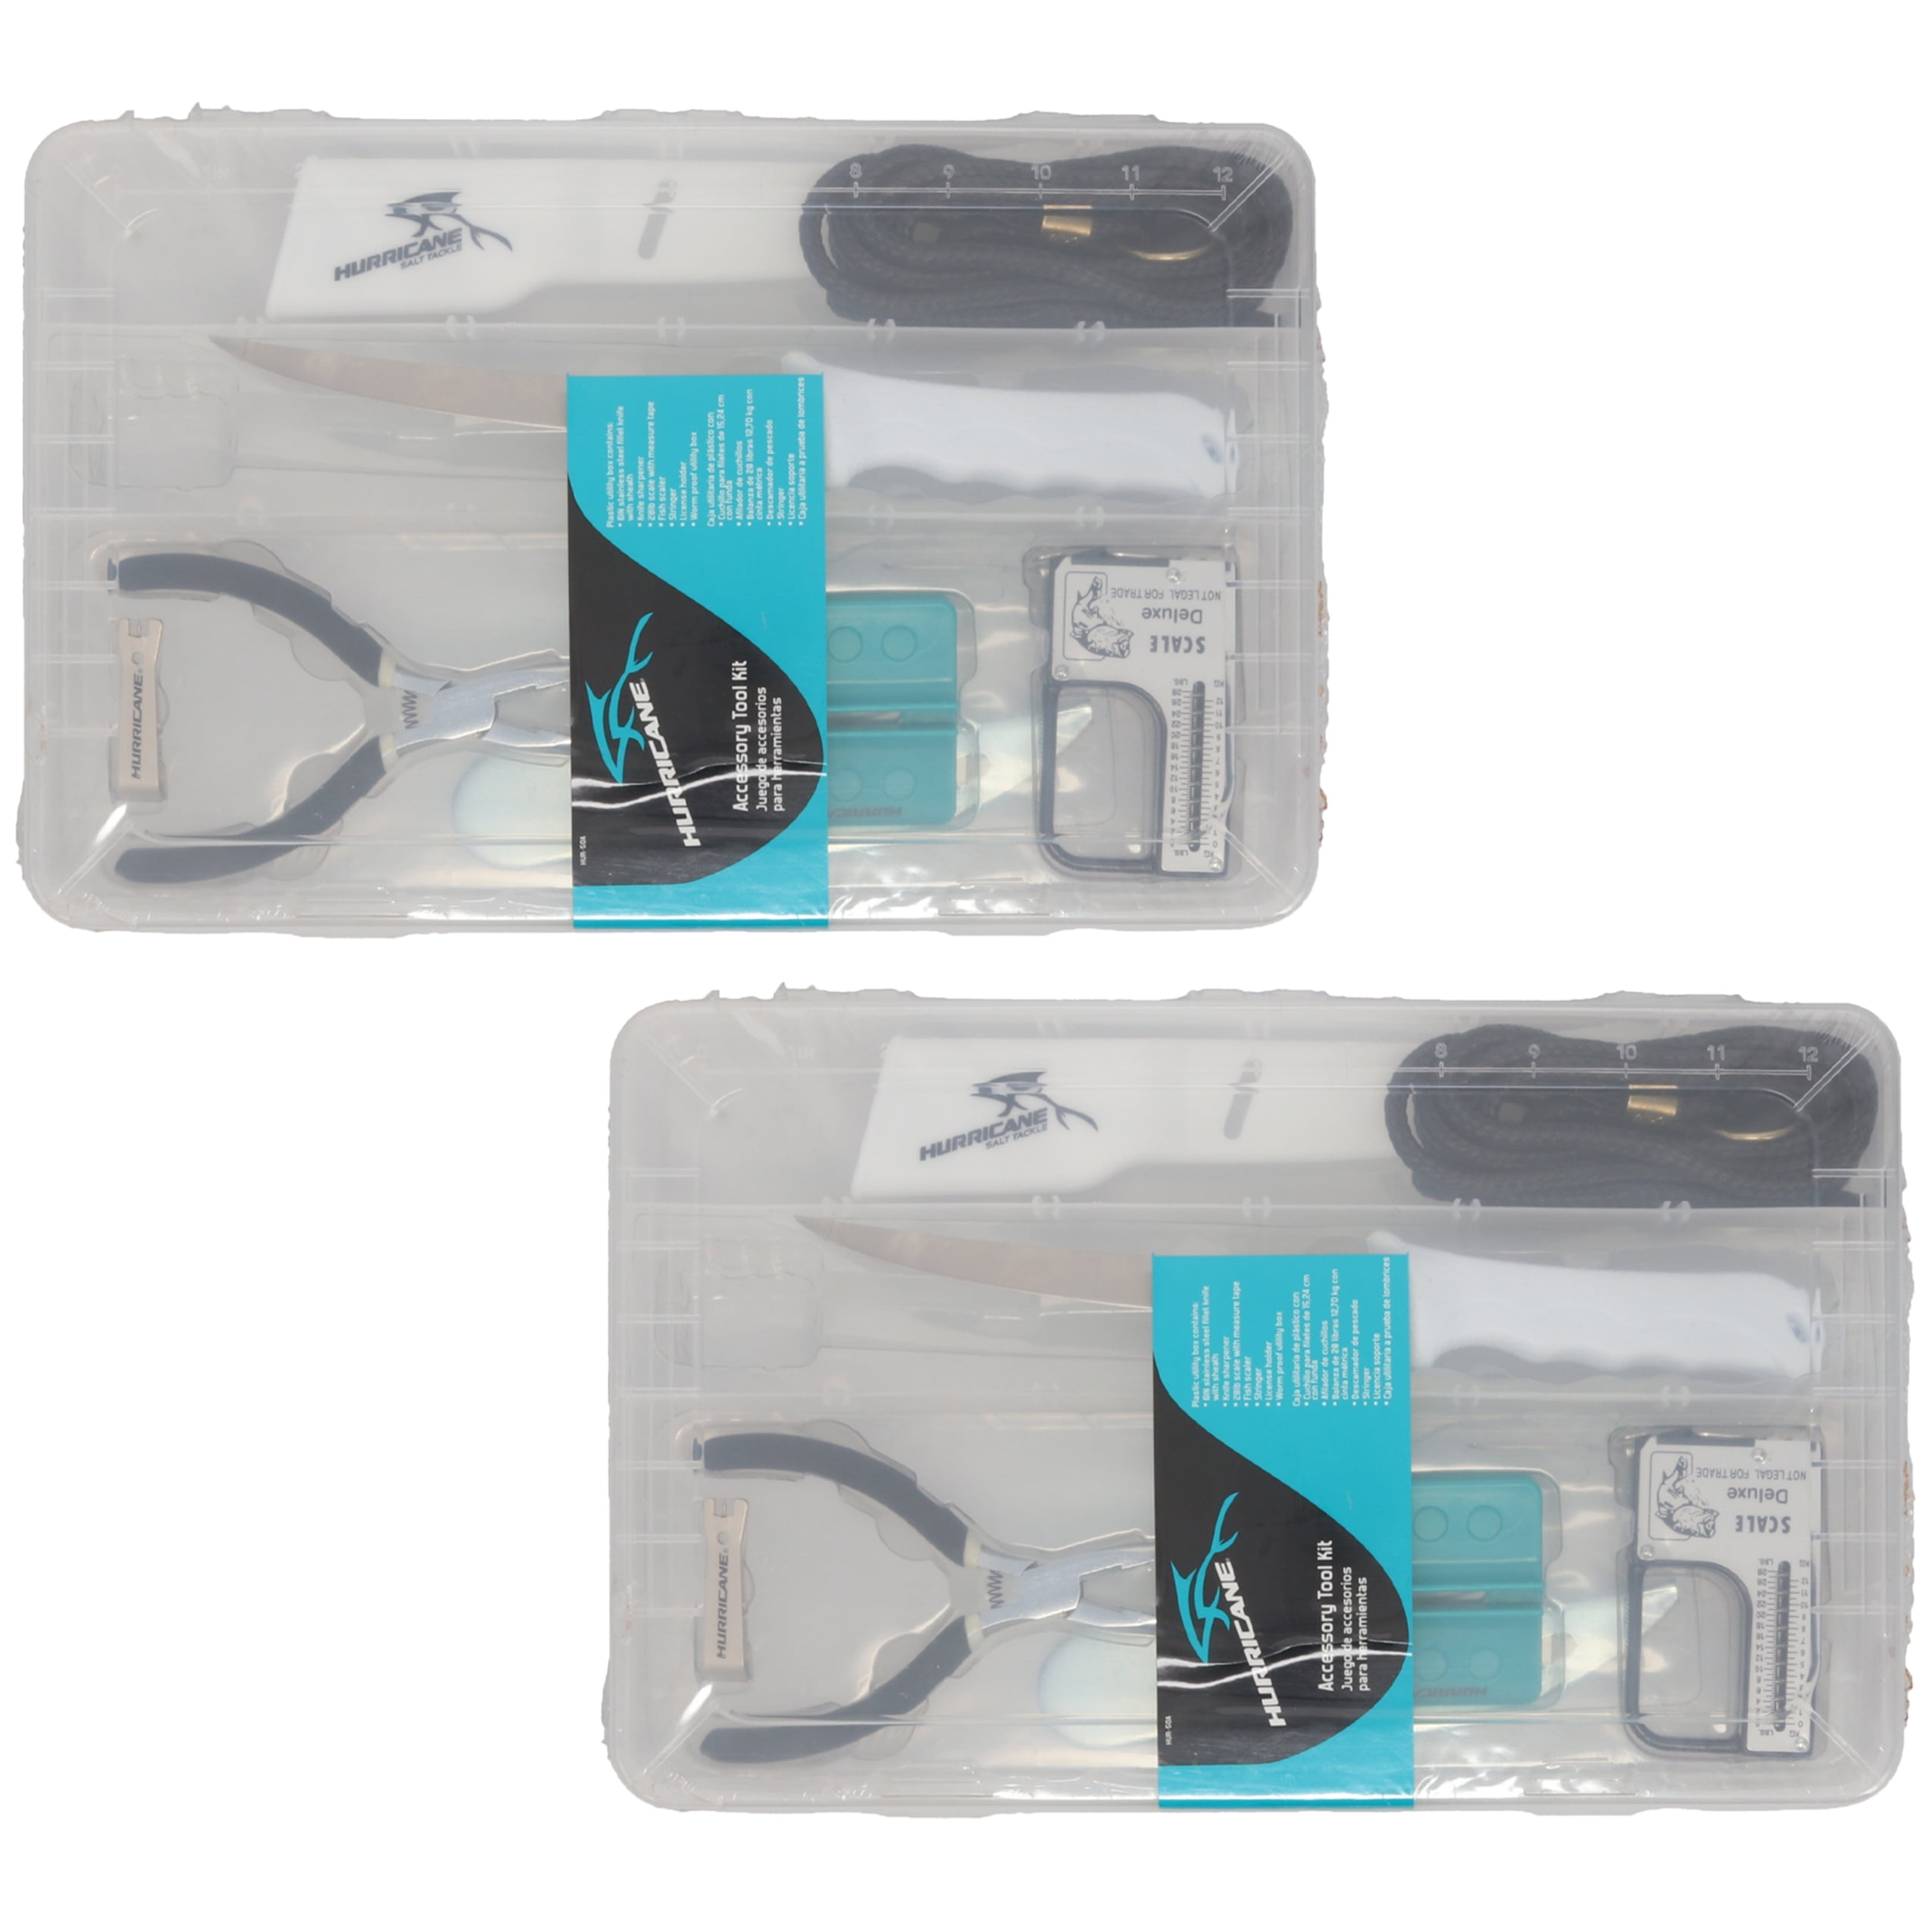 Hurricane HUR-50A Outdoor Fishing Accessory Tool Kit (4-Pack